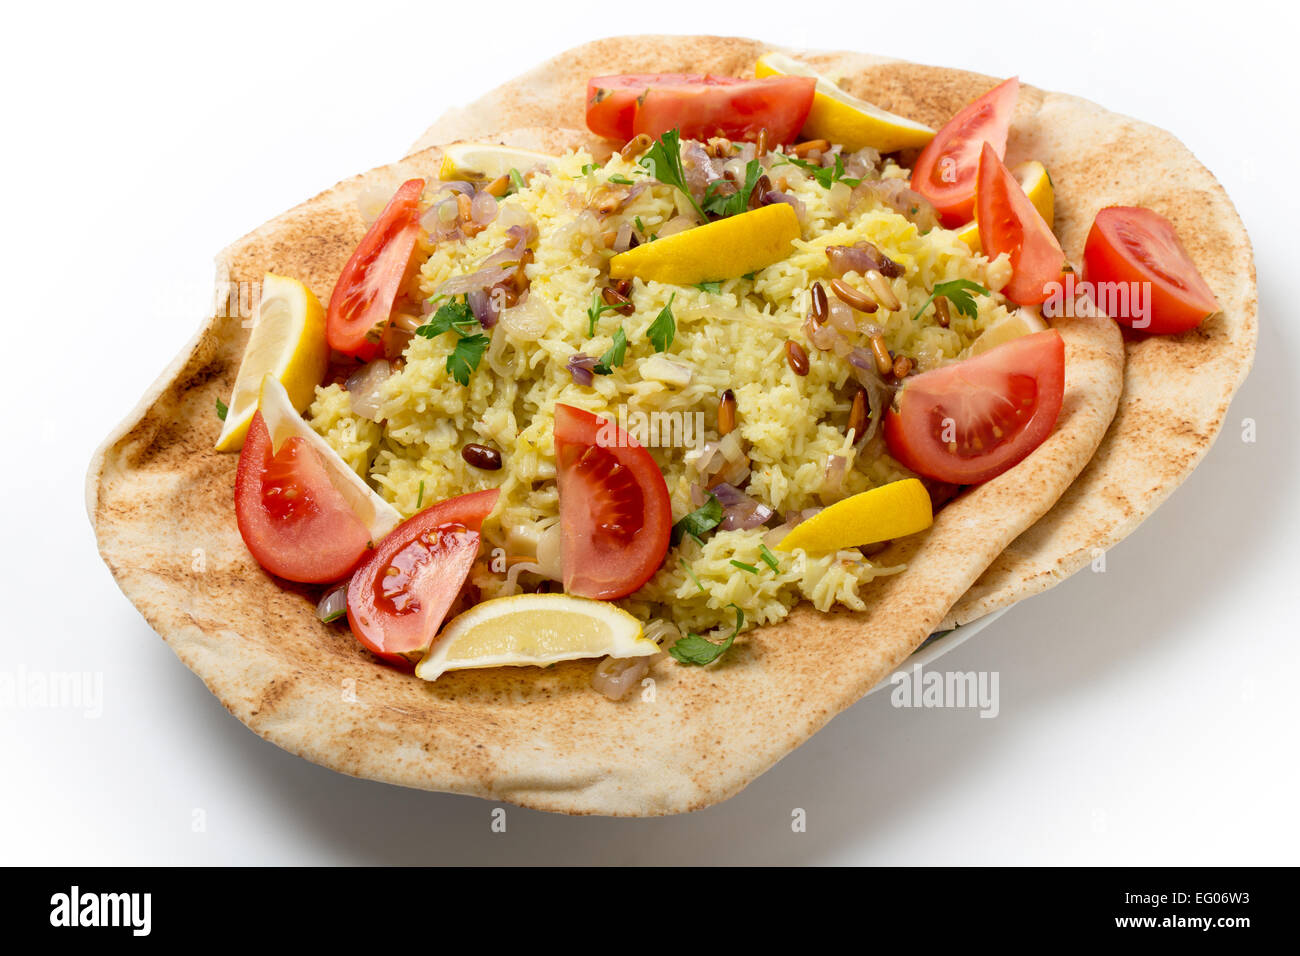 Levantine sayyadiyya, fish pilaf in saffron rice, garnished with lemon, tomato, pine-nuts and fried onion, on a bed of bread. Stock Photo